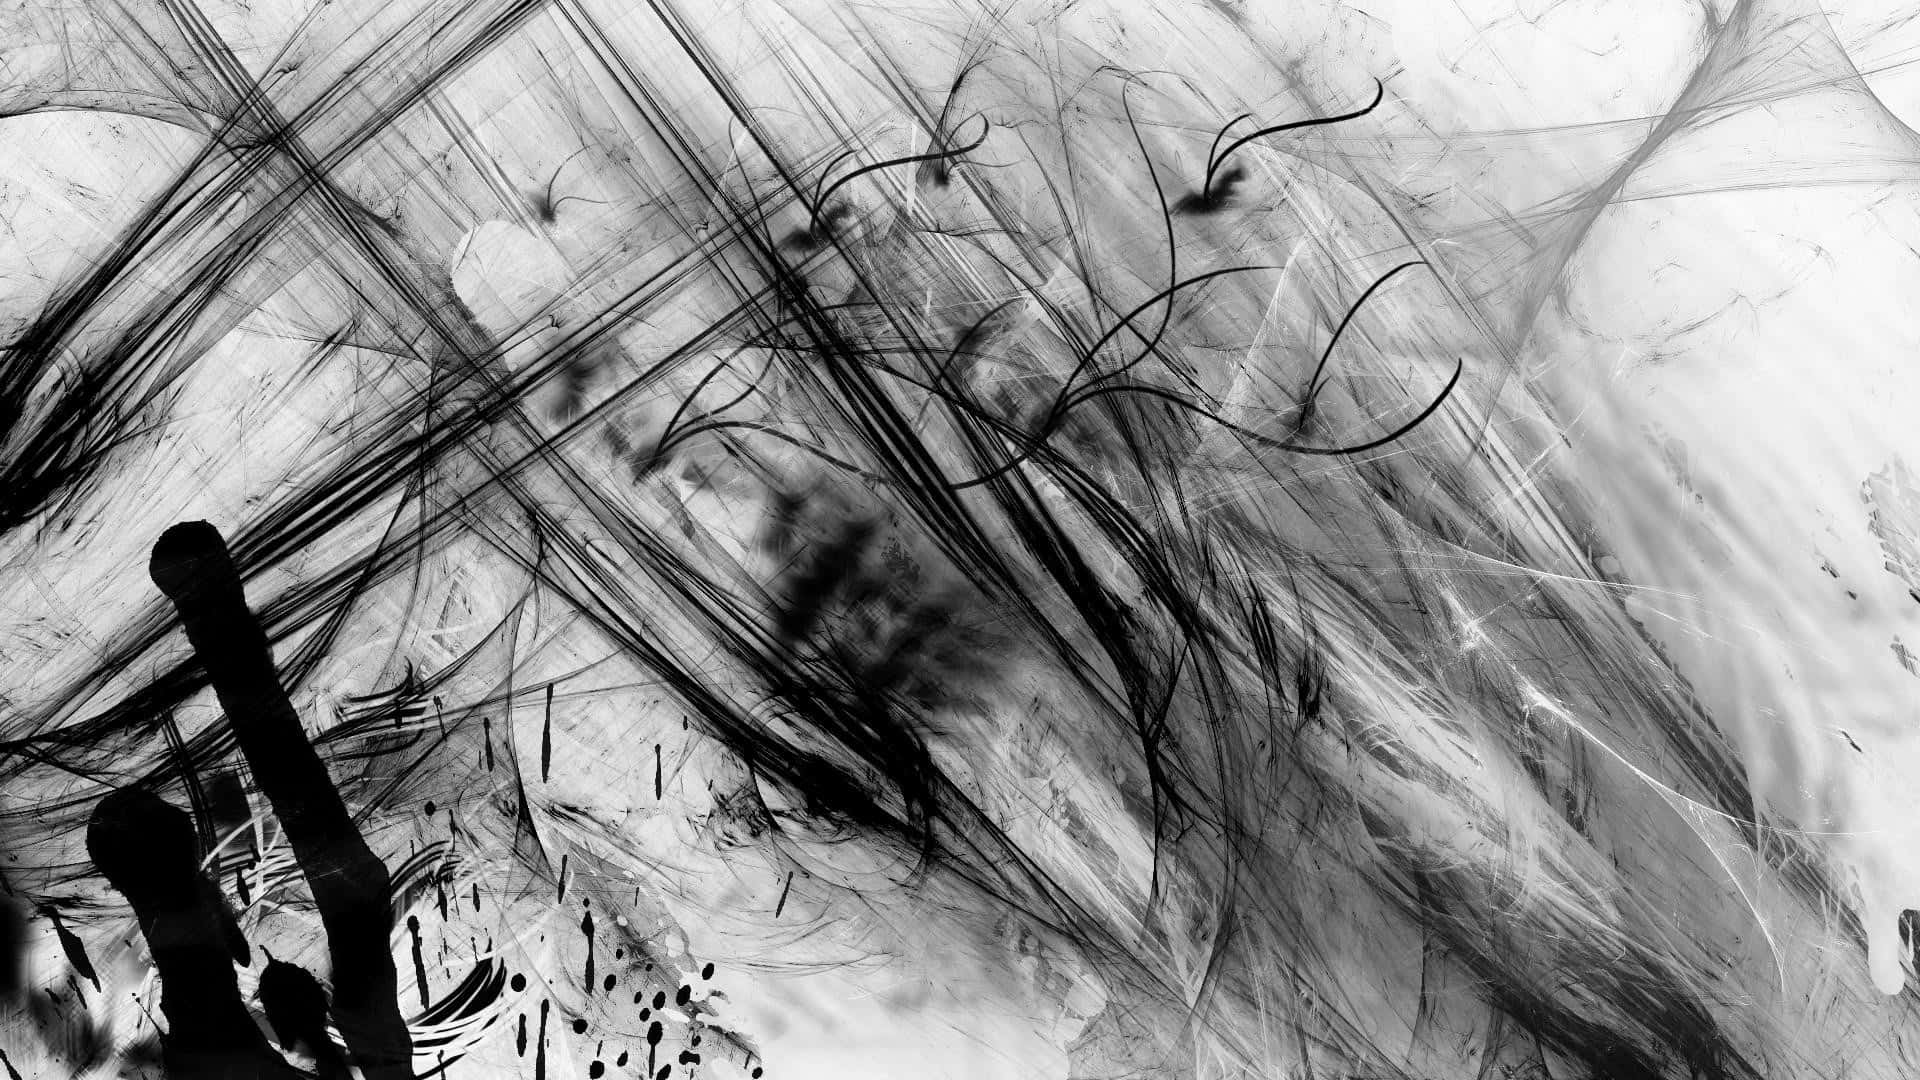 Captivating Black and White Abstract Art Wallpaper